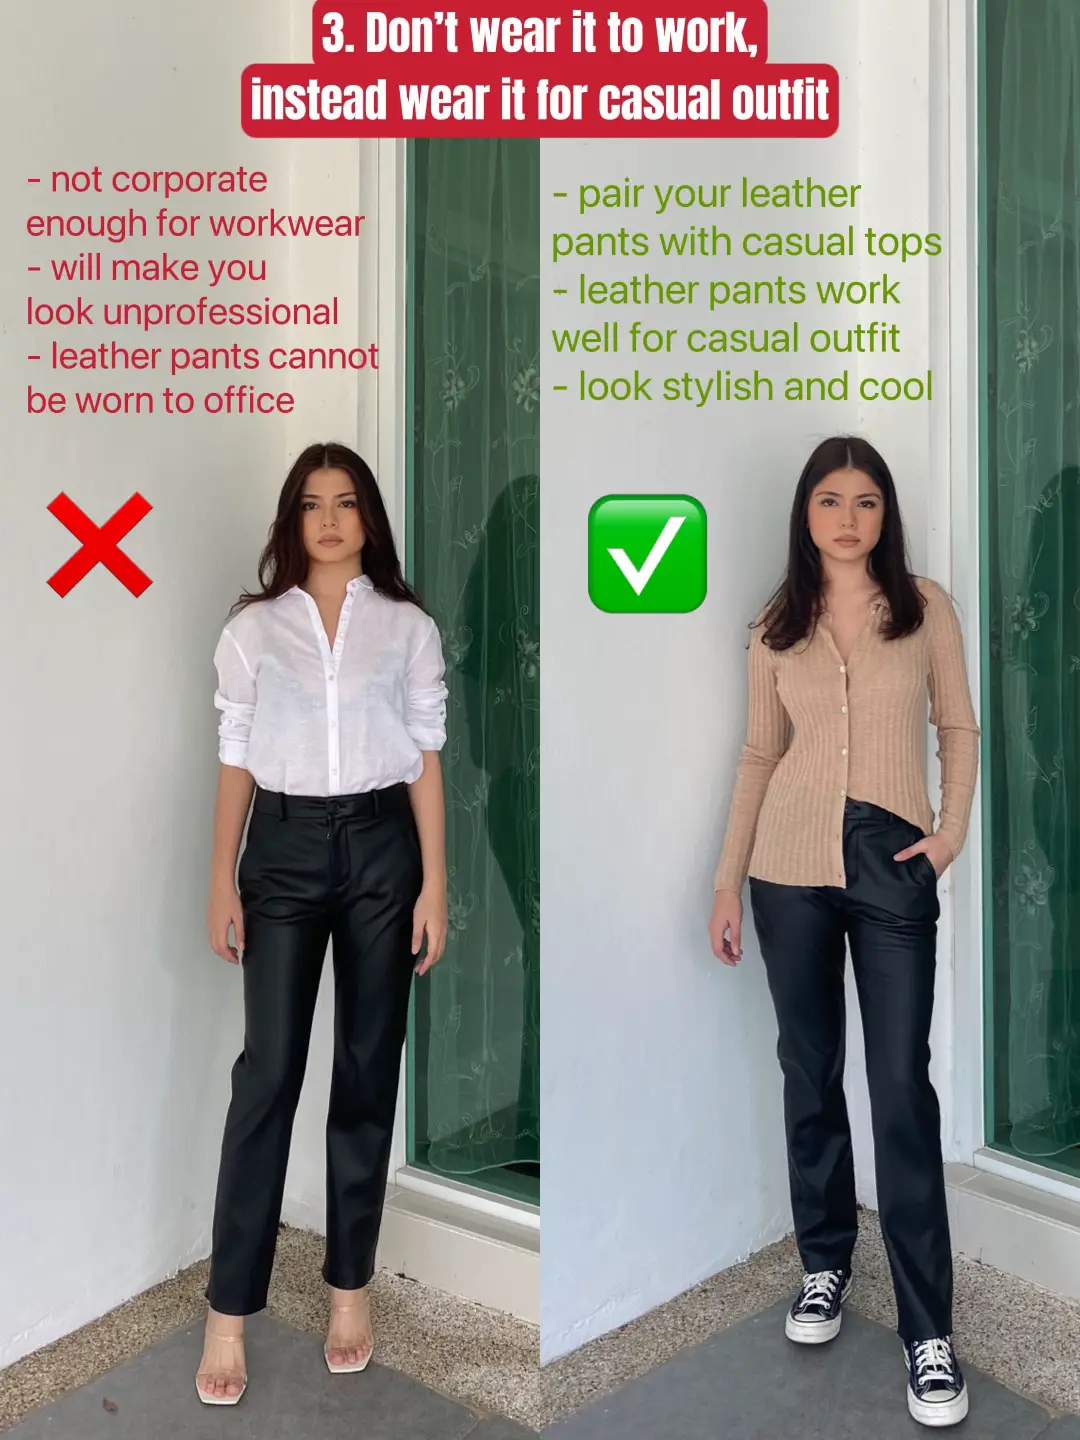 The Dos and Don'ts of Wearing Leather Pants